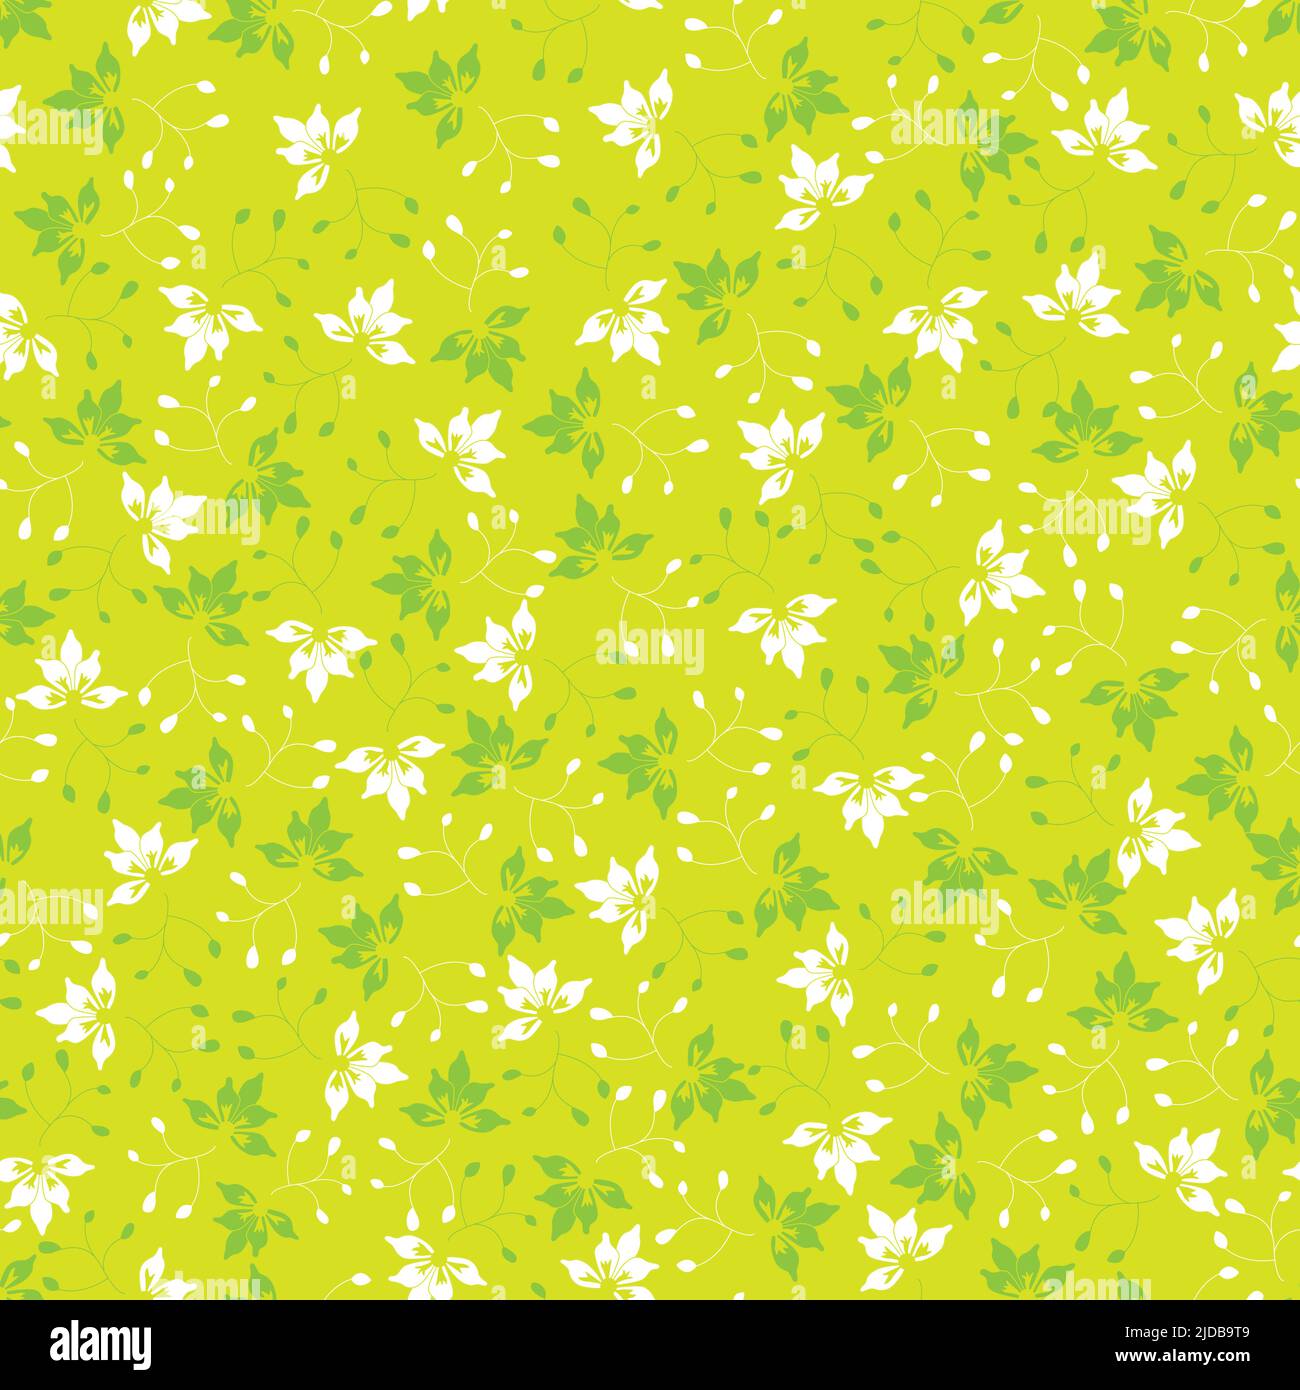 Tiny green and white hand drawn floral seamless pattern. Lime green fabric background. Vector repeat pattern for fabric allover print and textile Stock Vector